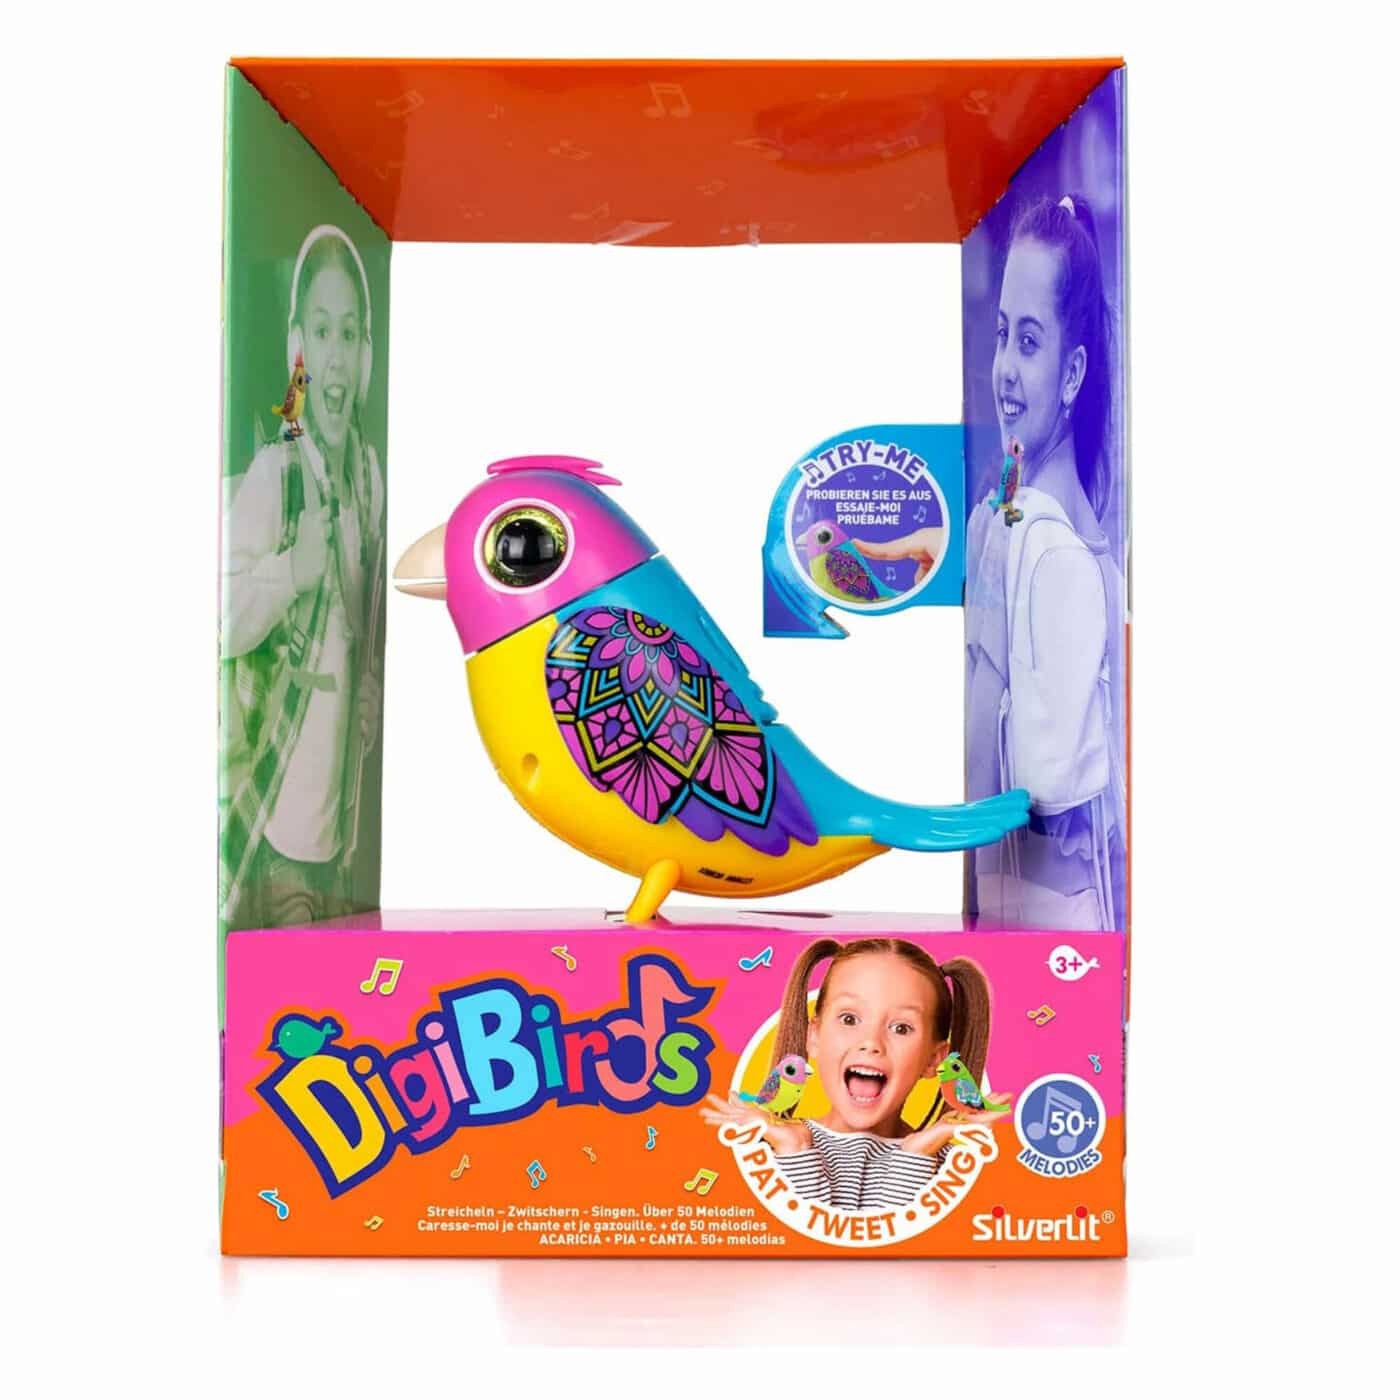 Silverlit - Digibirds II Single Pack Assorted5